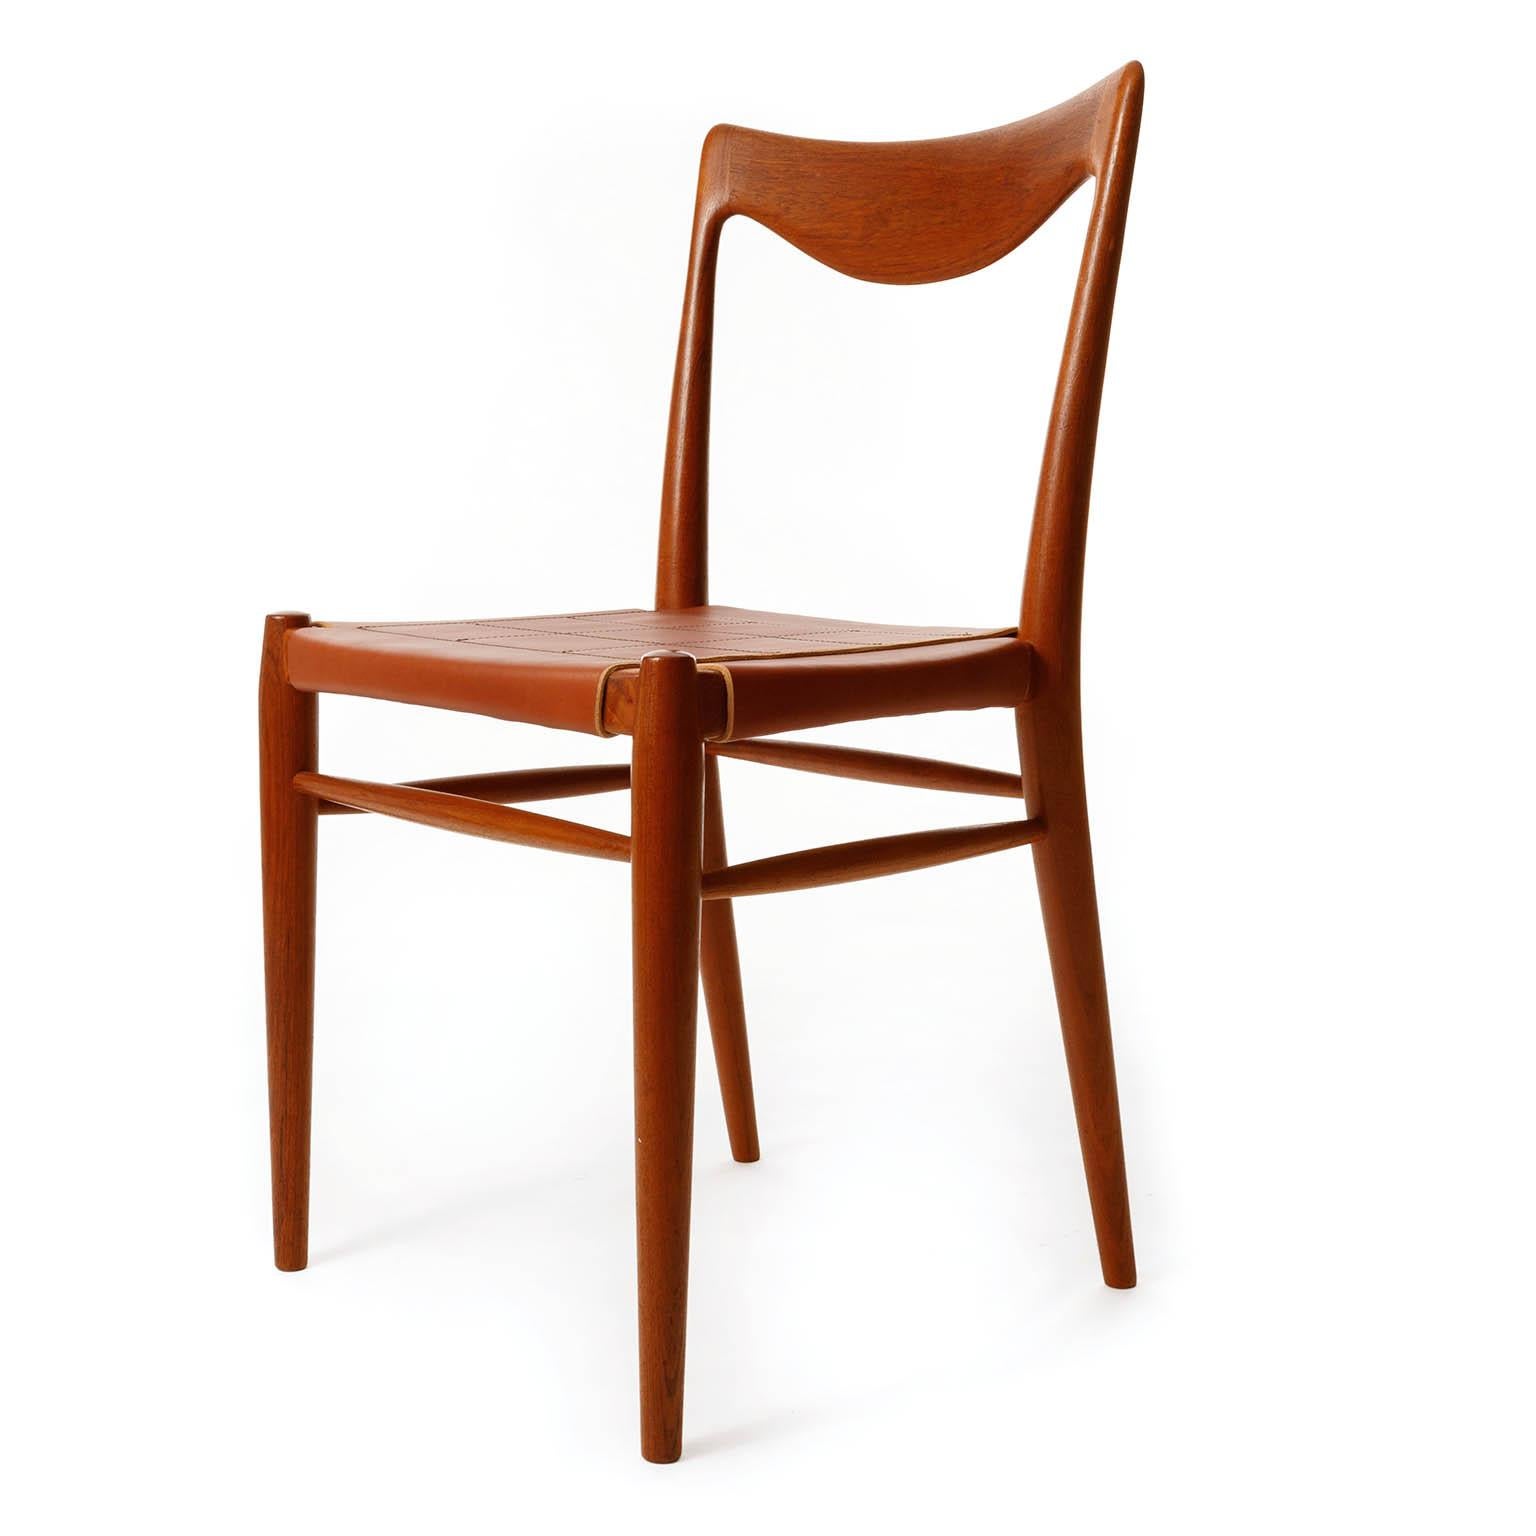 Six 'Bambi' Chairs Rastad & Relling for Gustav Bahus, Cognac Leather Teak, 1950s In Good Condition For Sale In Hausmannstätten, AT